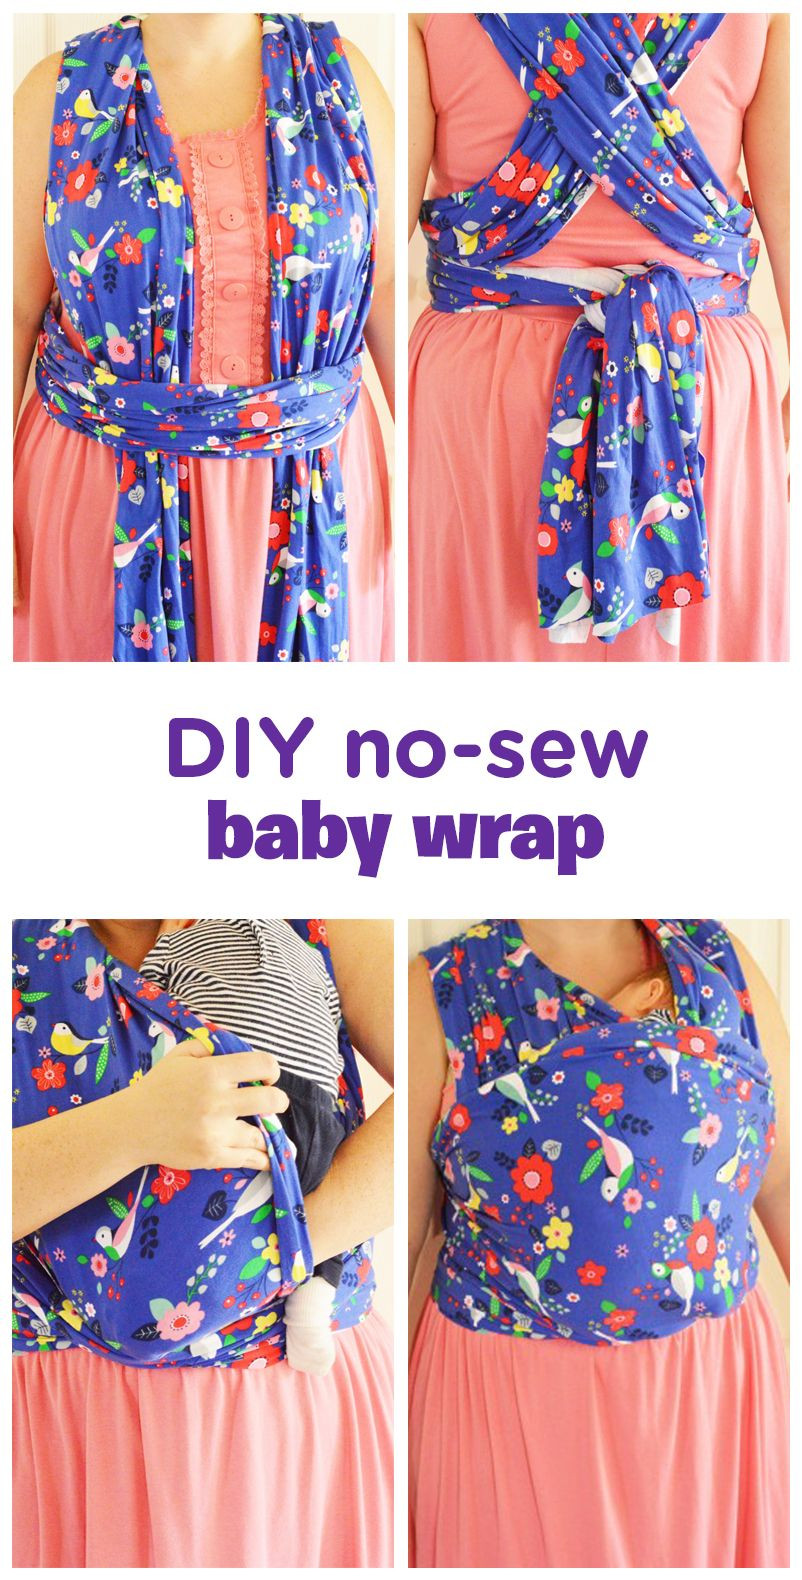 Woven Baby Wrap DIY
 How to Make Your Own No Sew Moby Wrap